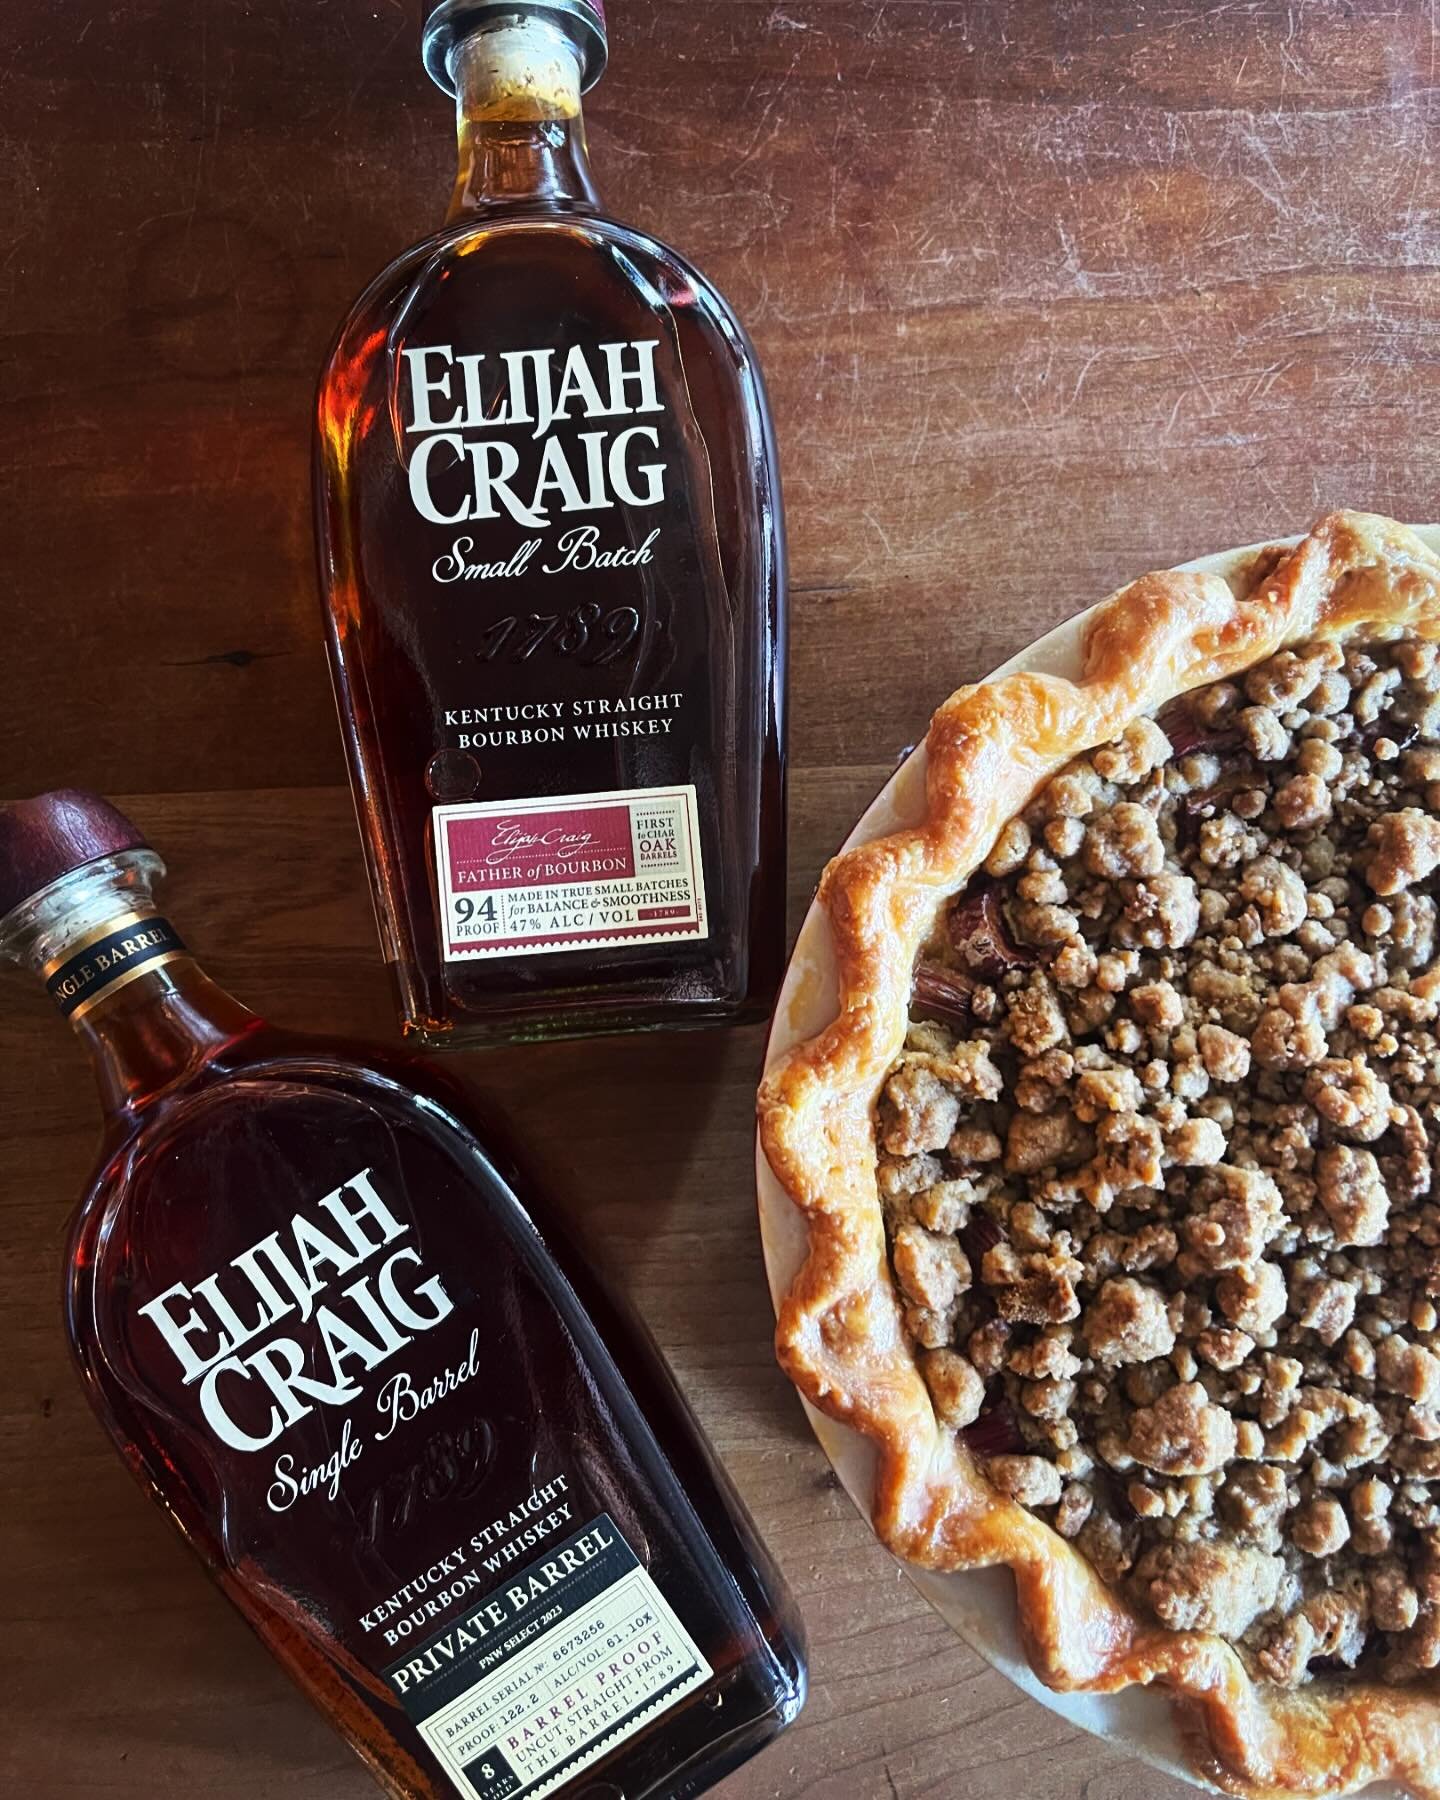 Pie &amp; Whiskey Wednesday! Rhubarb amaro custard pie with gingersnap crumble &amp; 25% off select Elijah Craig. Bar opens at 4pm, see you soon 😎